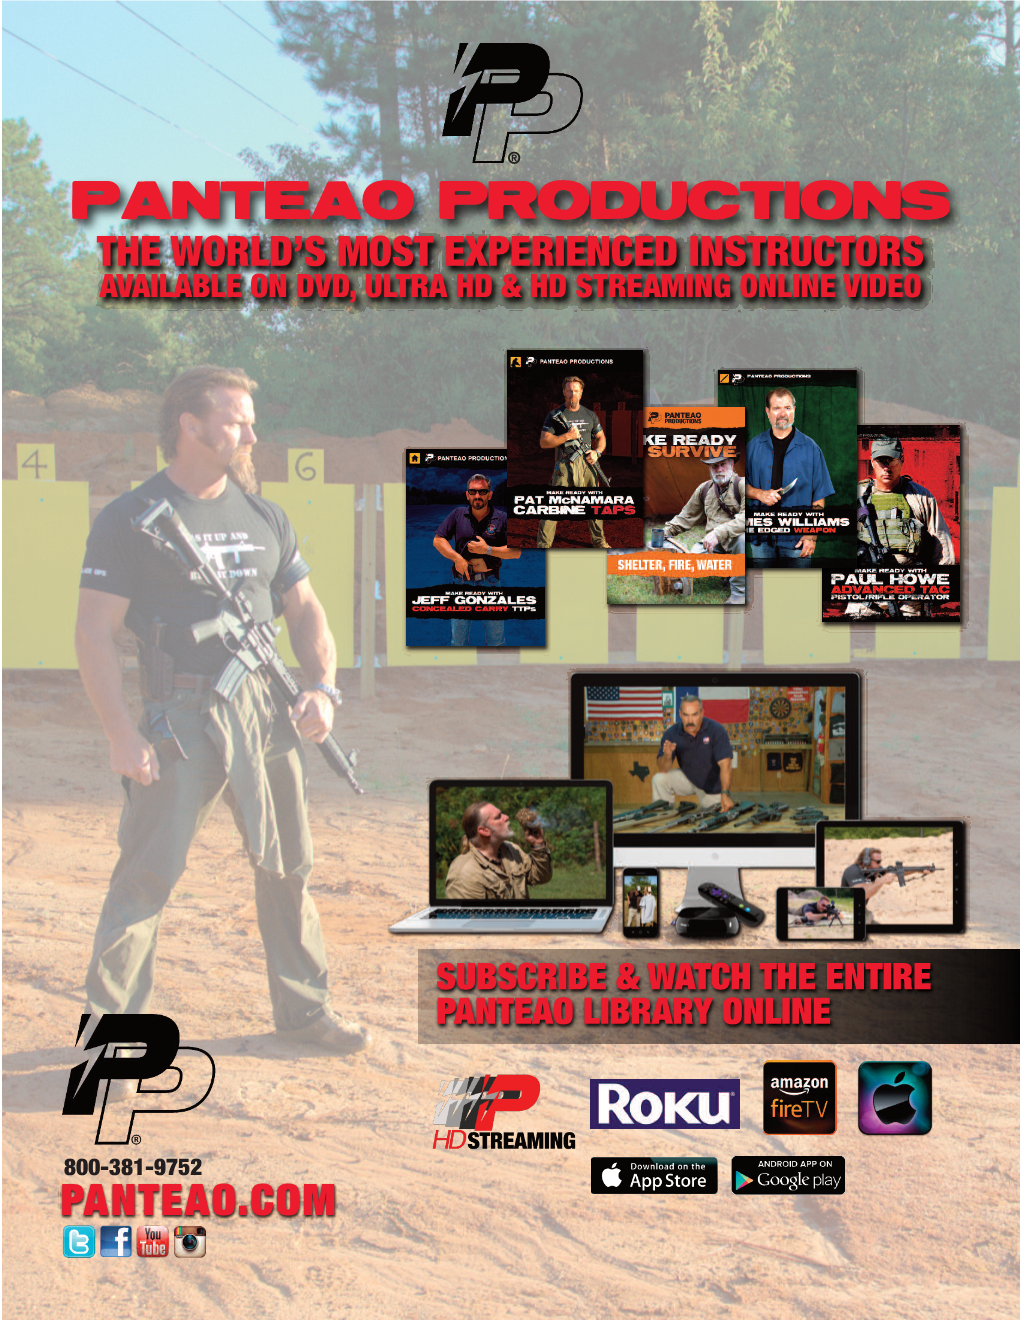 Panteao Productions the World’S Most Experienced Instructors Available on Dvd, Ultra Hd & Hd Streaming Online Video